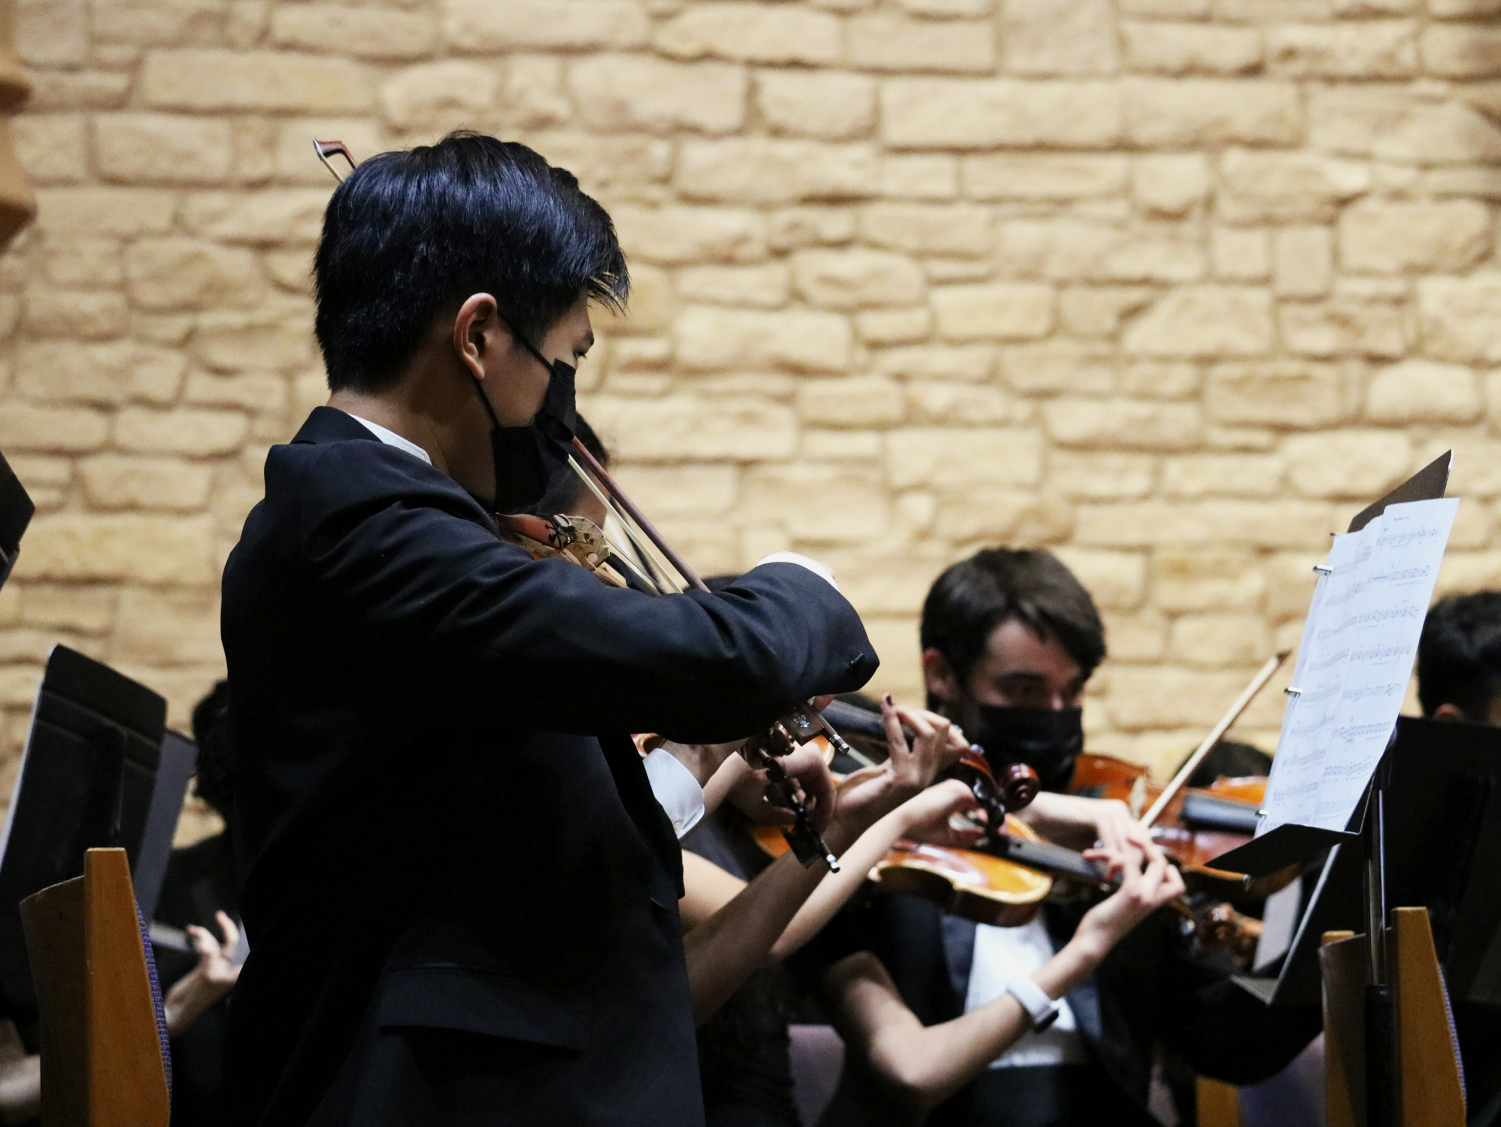 Orchestra+Amplifies+Holiday+Ambience+at+Winter+Concert+Performance